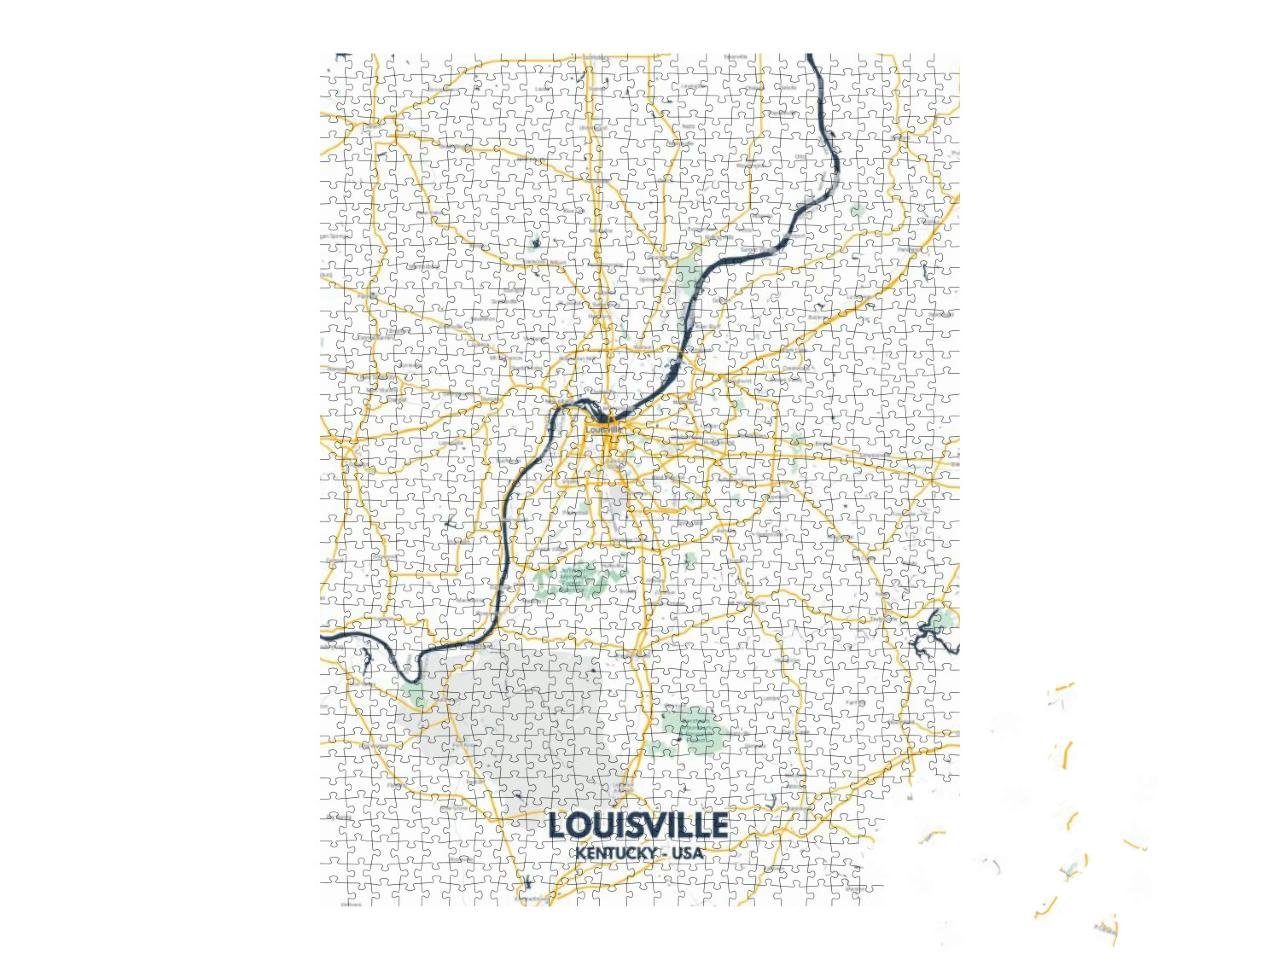 Louisville - Kentucky Map. Louisville - Kentucky Road Map... Jigsaw Puzzle with 1000 pieces